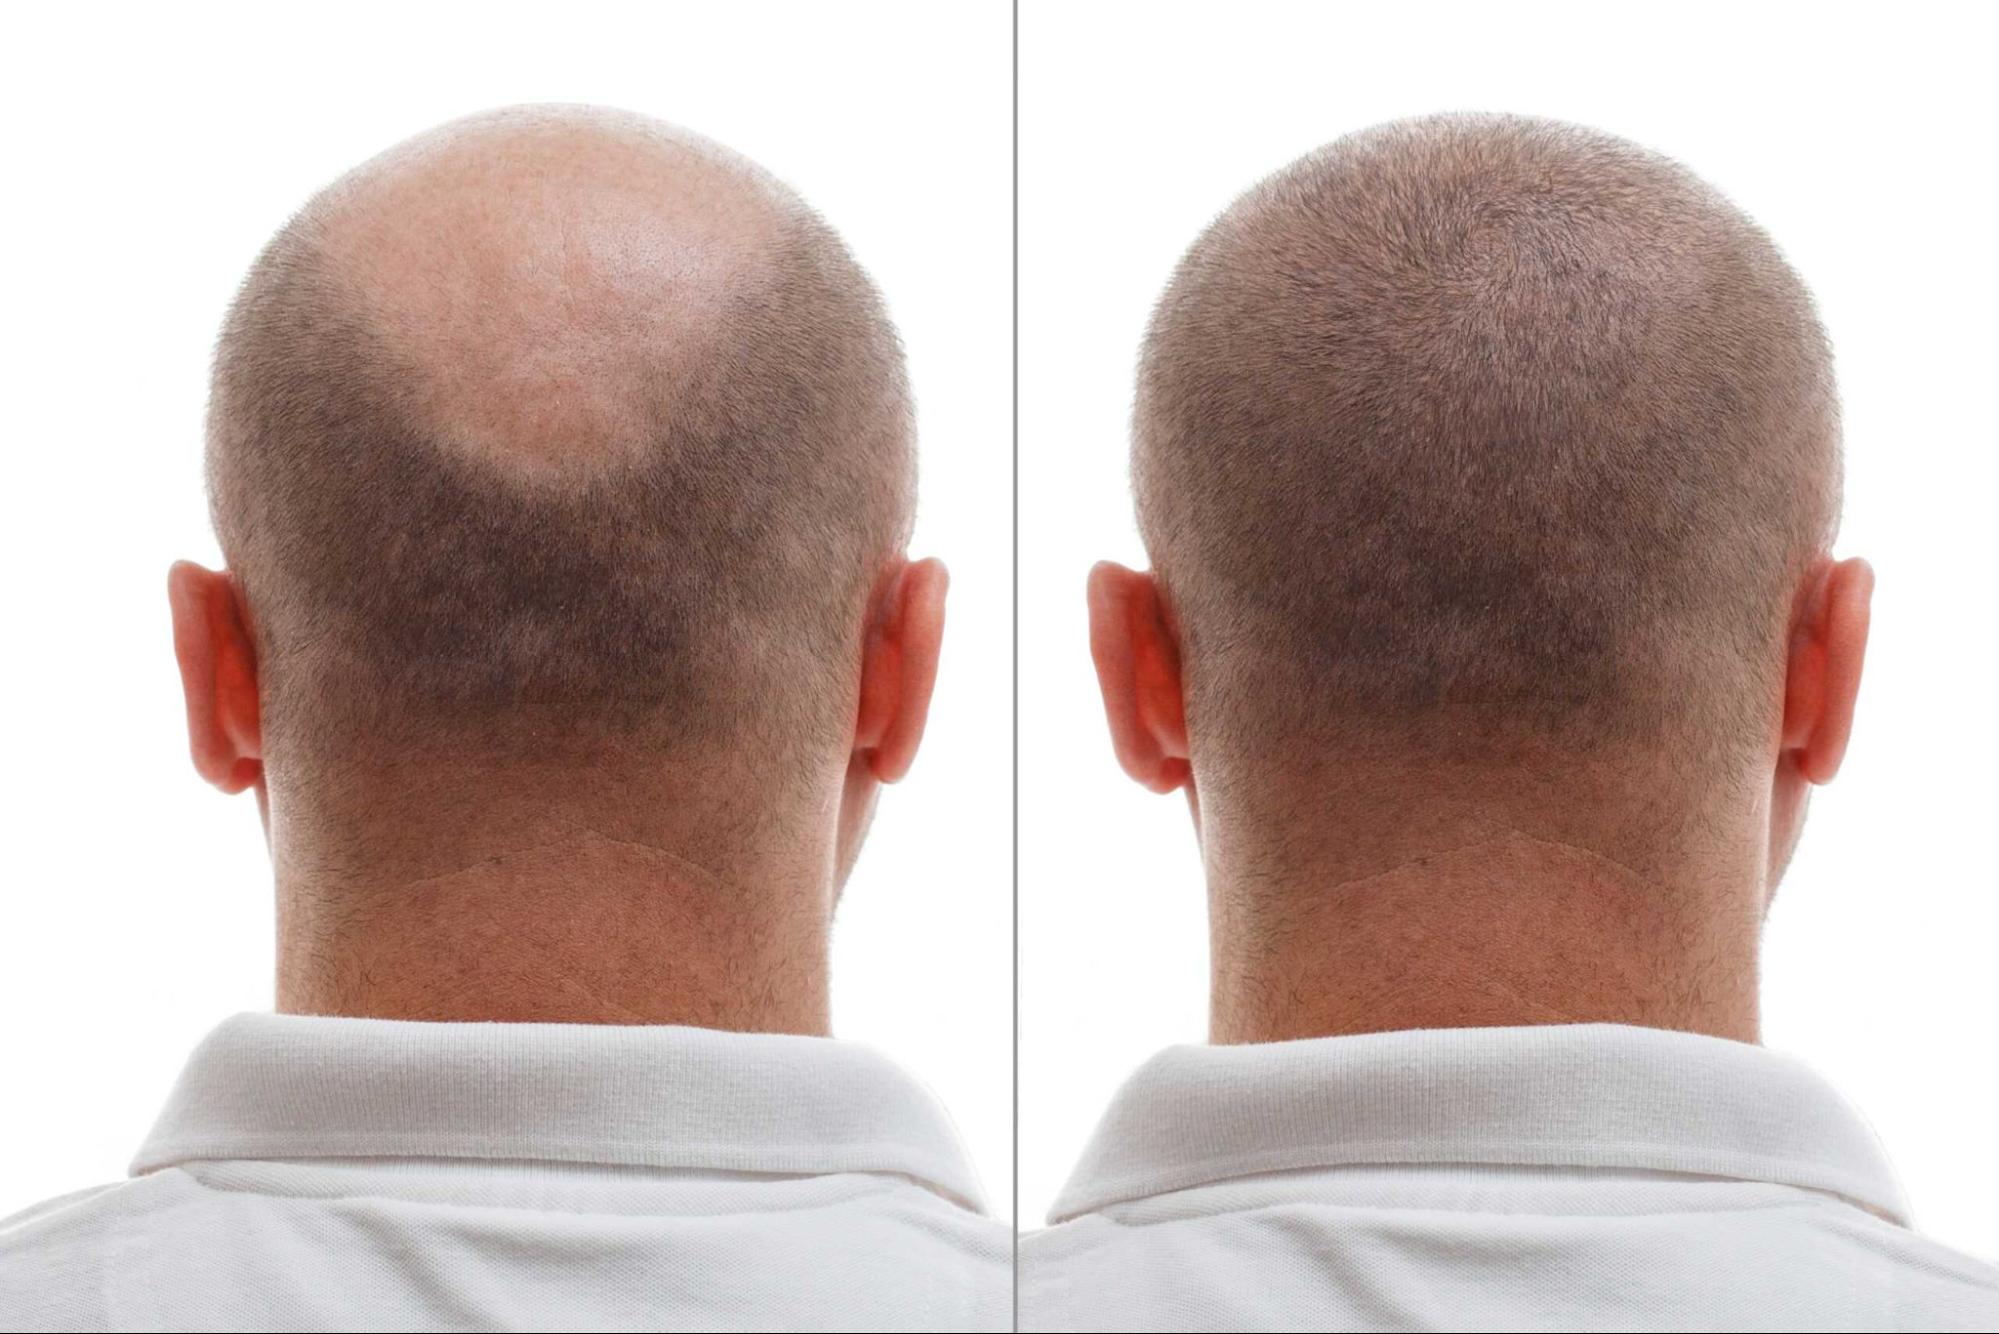 Can I Go Bald After a Hair Transplant? | Hair Sure